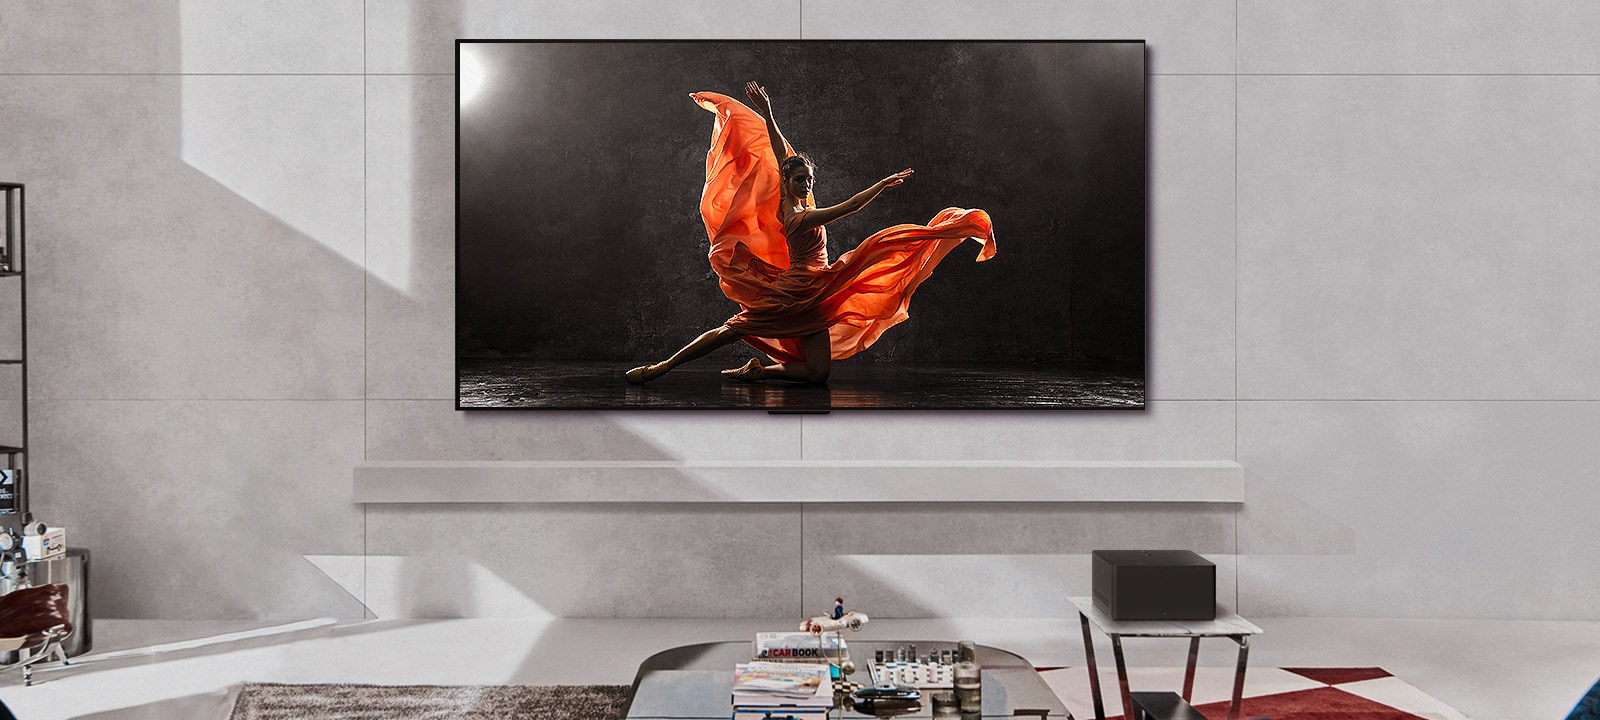 LG SIGNATURE OLED M4 and LG Soundbar in a modern living space in daytime. The screen image of a dancer on a dark stage is displayed with the ideal brightness levels.